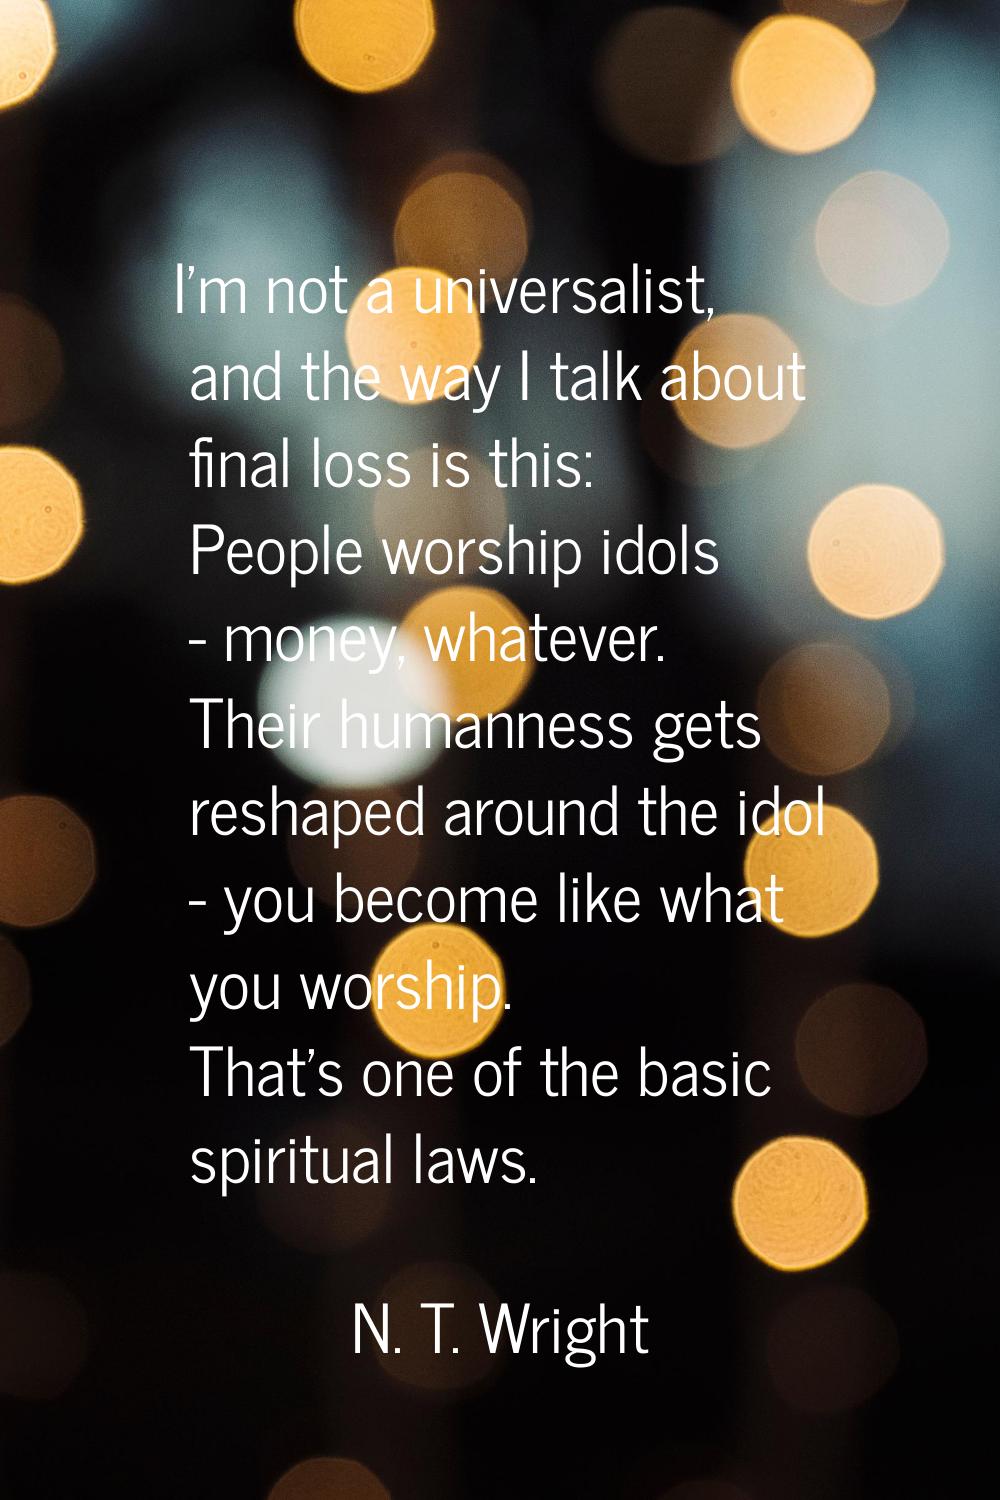 I'm not a universalist, and the way I talk about final loss is this: People worship idols - money, 